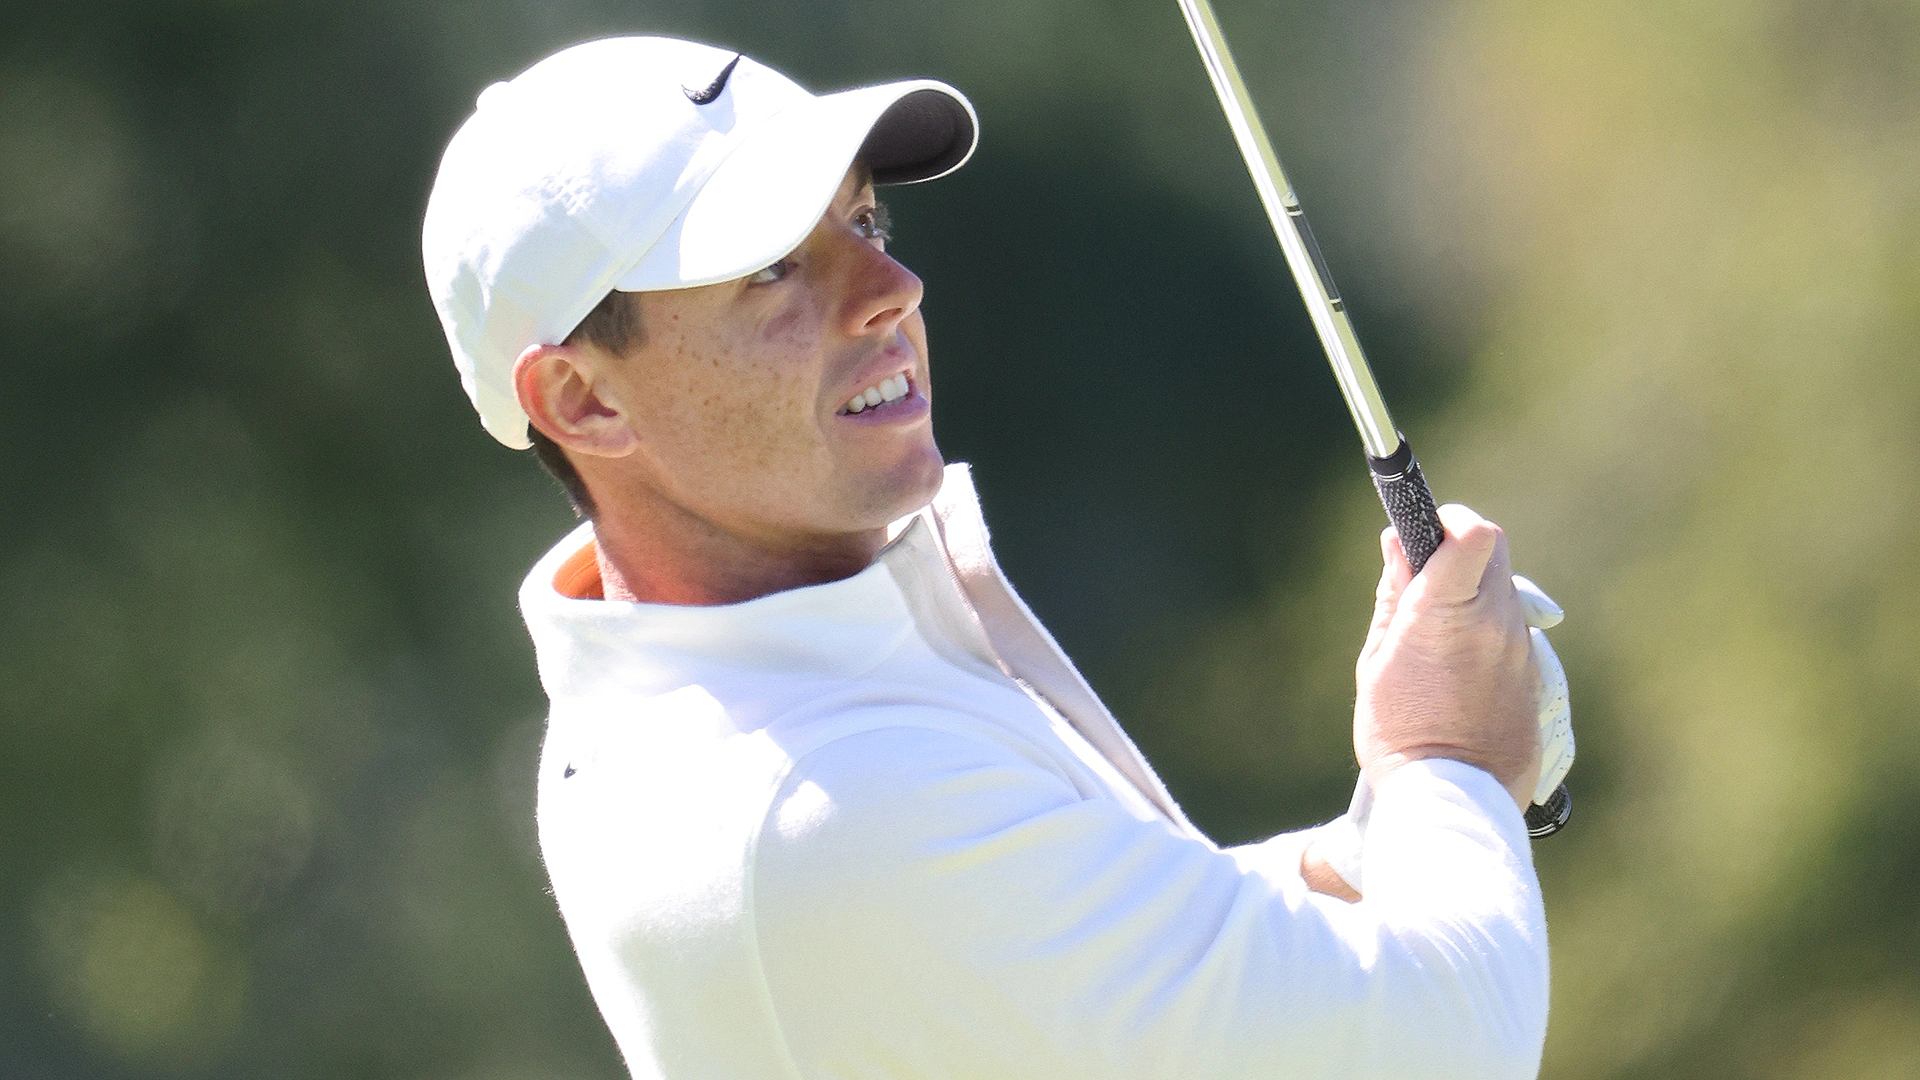 Rory McIlroy plays way back into the mix with 2-under 68 on Saturday 2